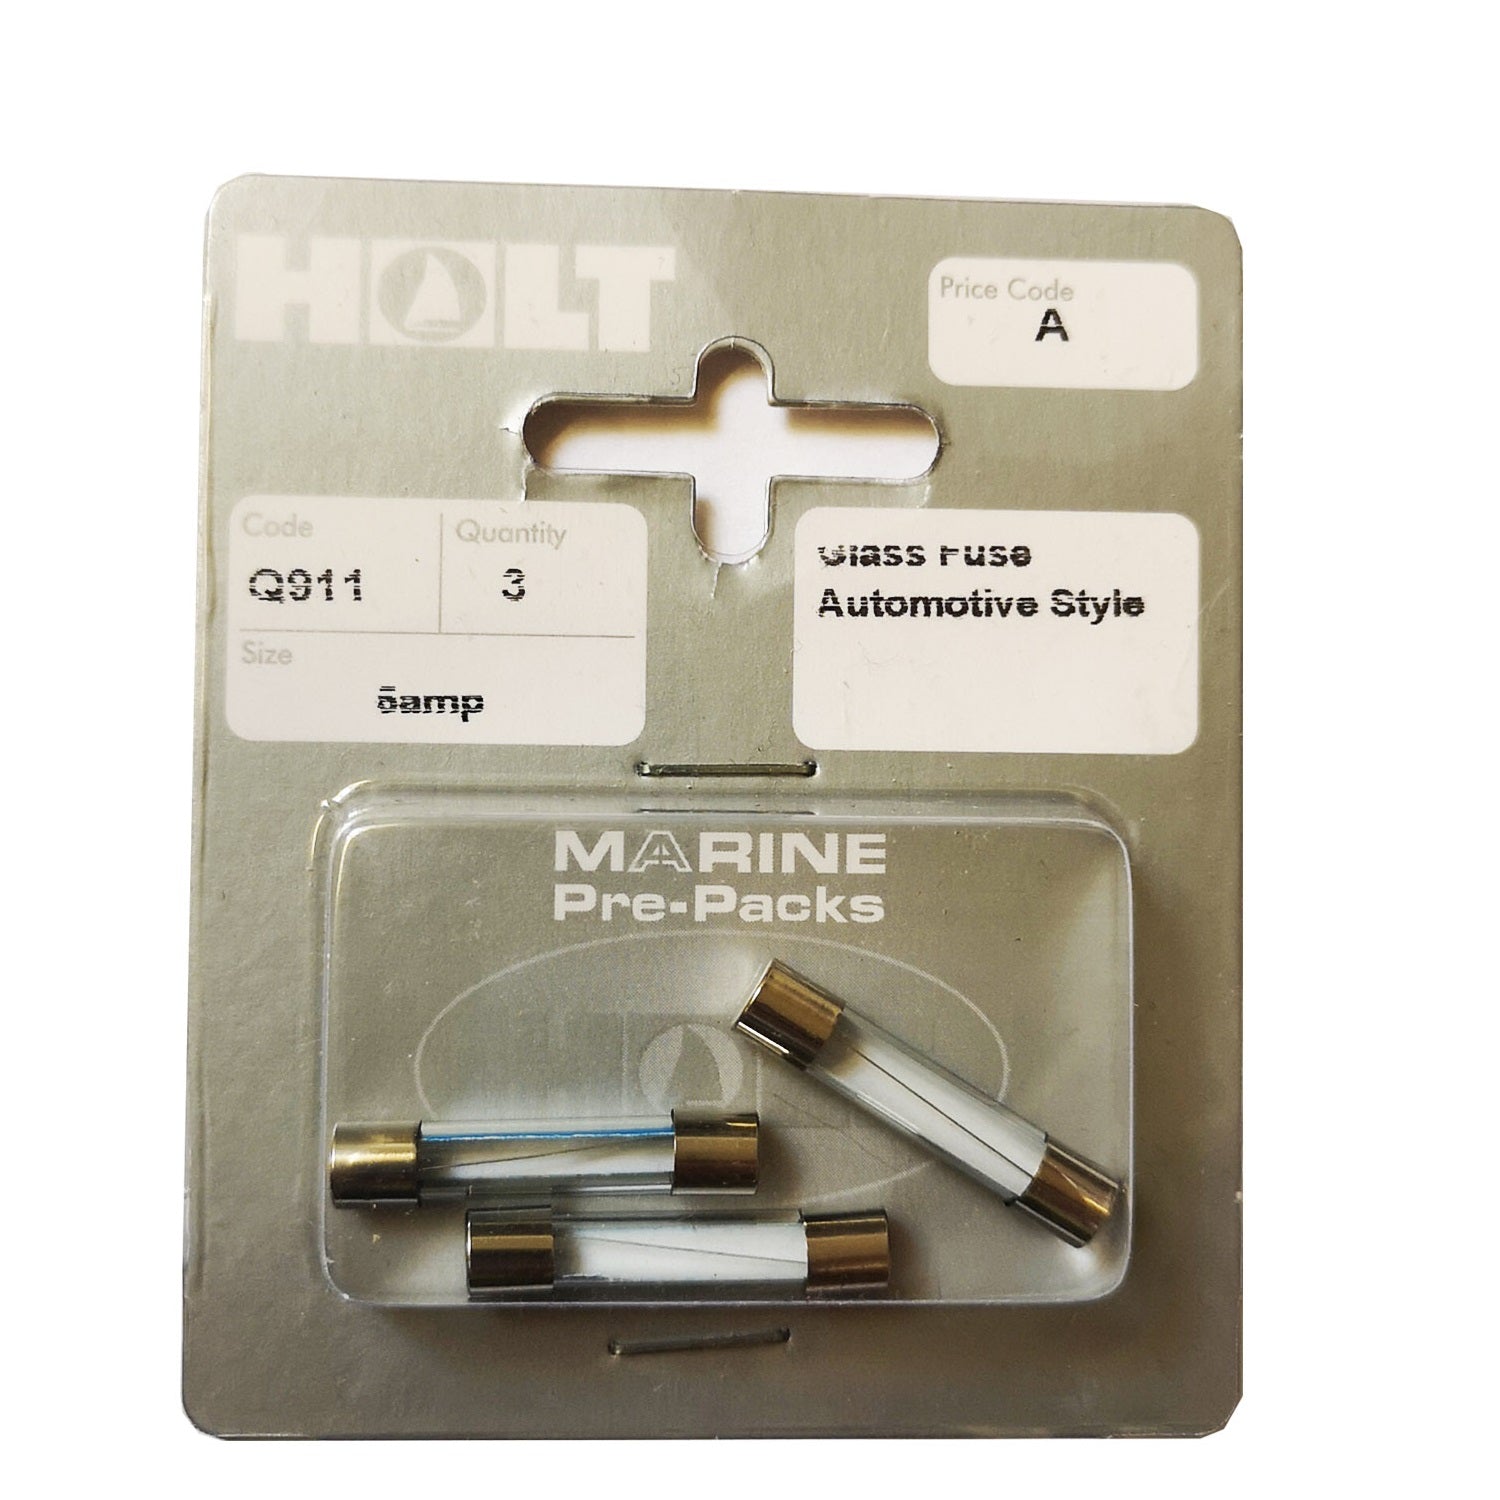 Holt Marine Q911 Automotive Style Glass Fuse Pkt3 - 5amp - Premium Fuses from Holt Marine - Just $1.99! Shop now at W Hurst & Son (IW) Ltd